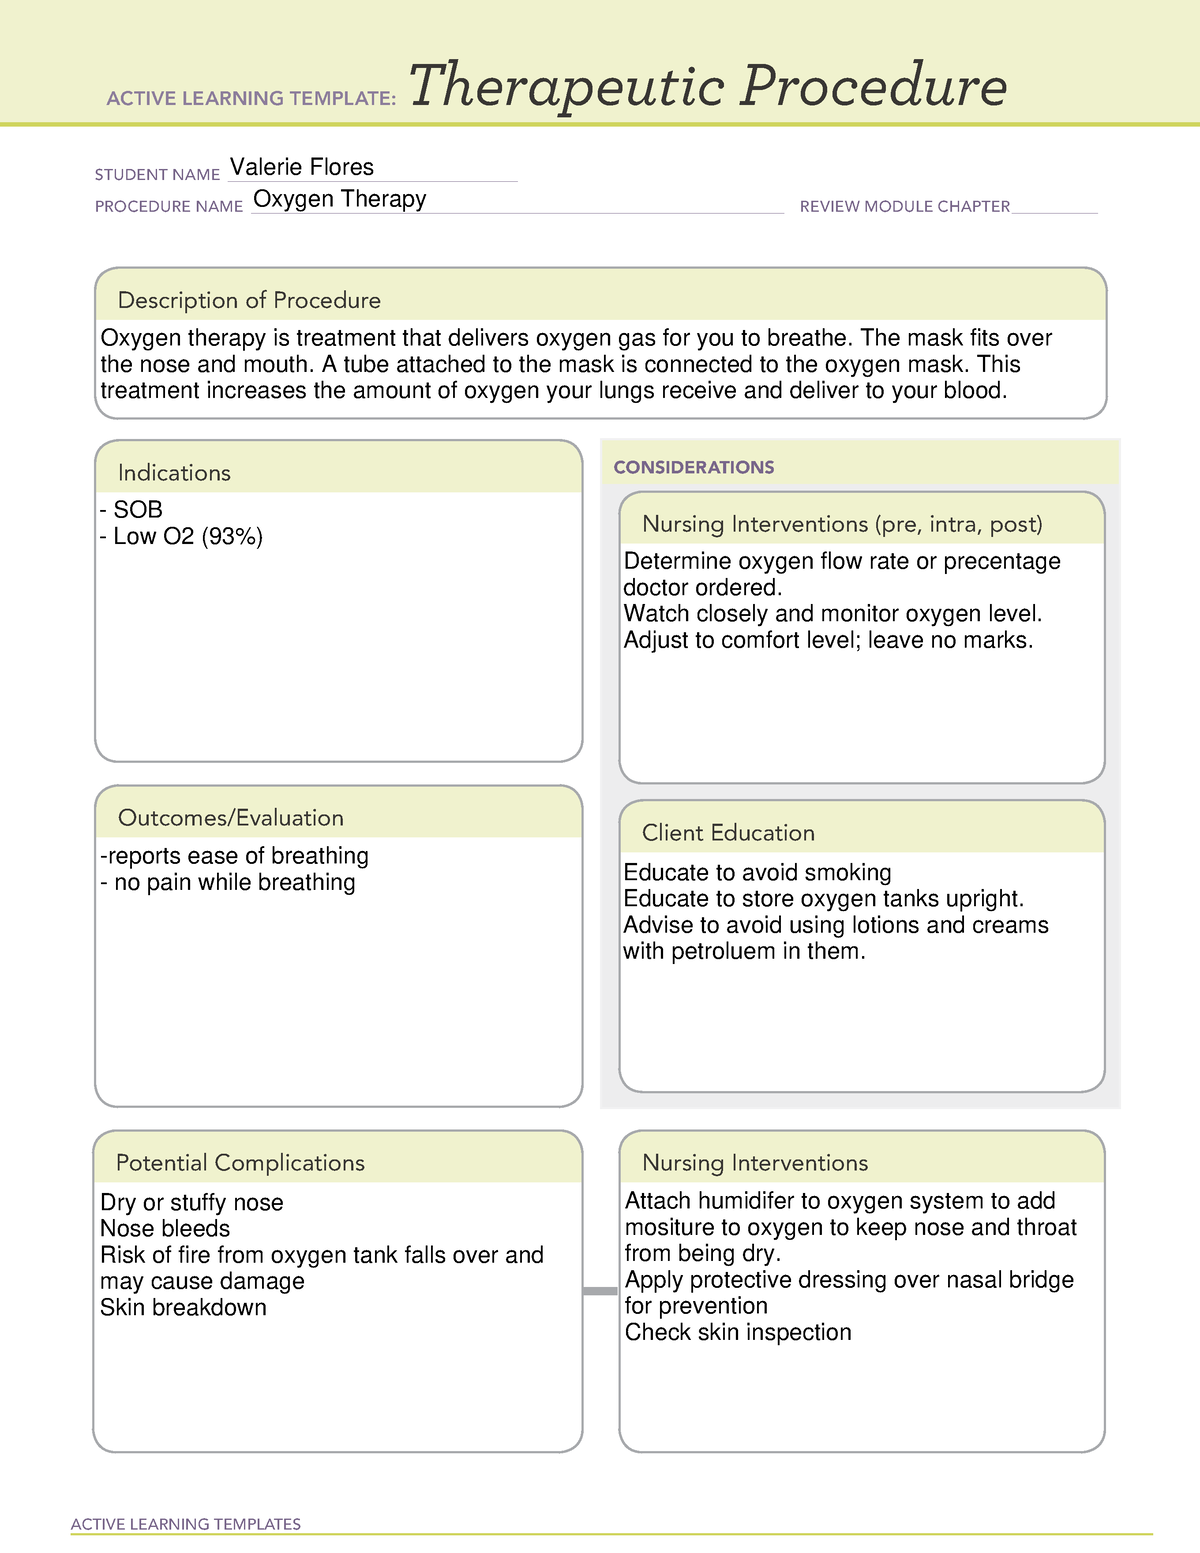 ati-theraputic-oxygen-therapy-active-learning-templates-therapeutic